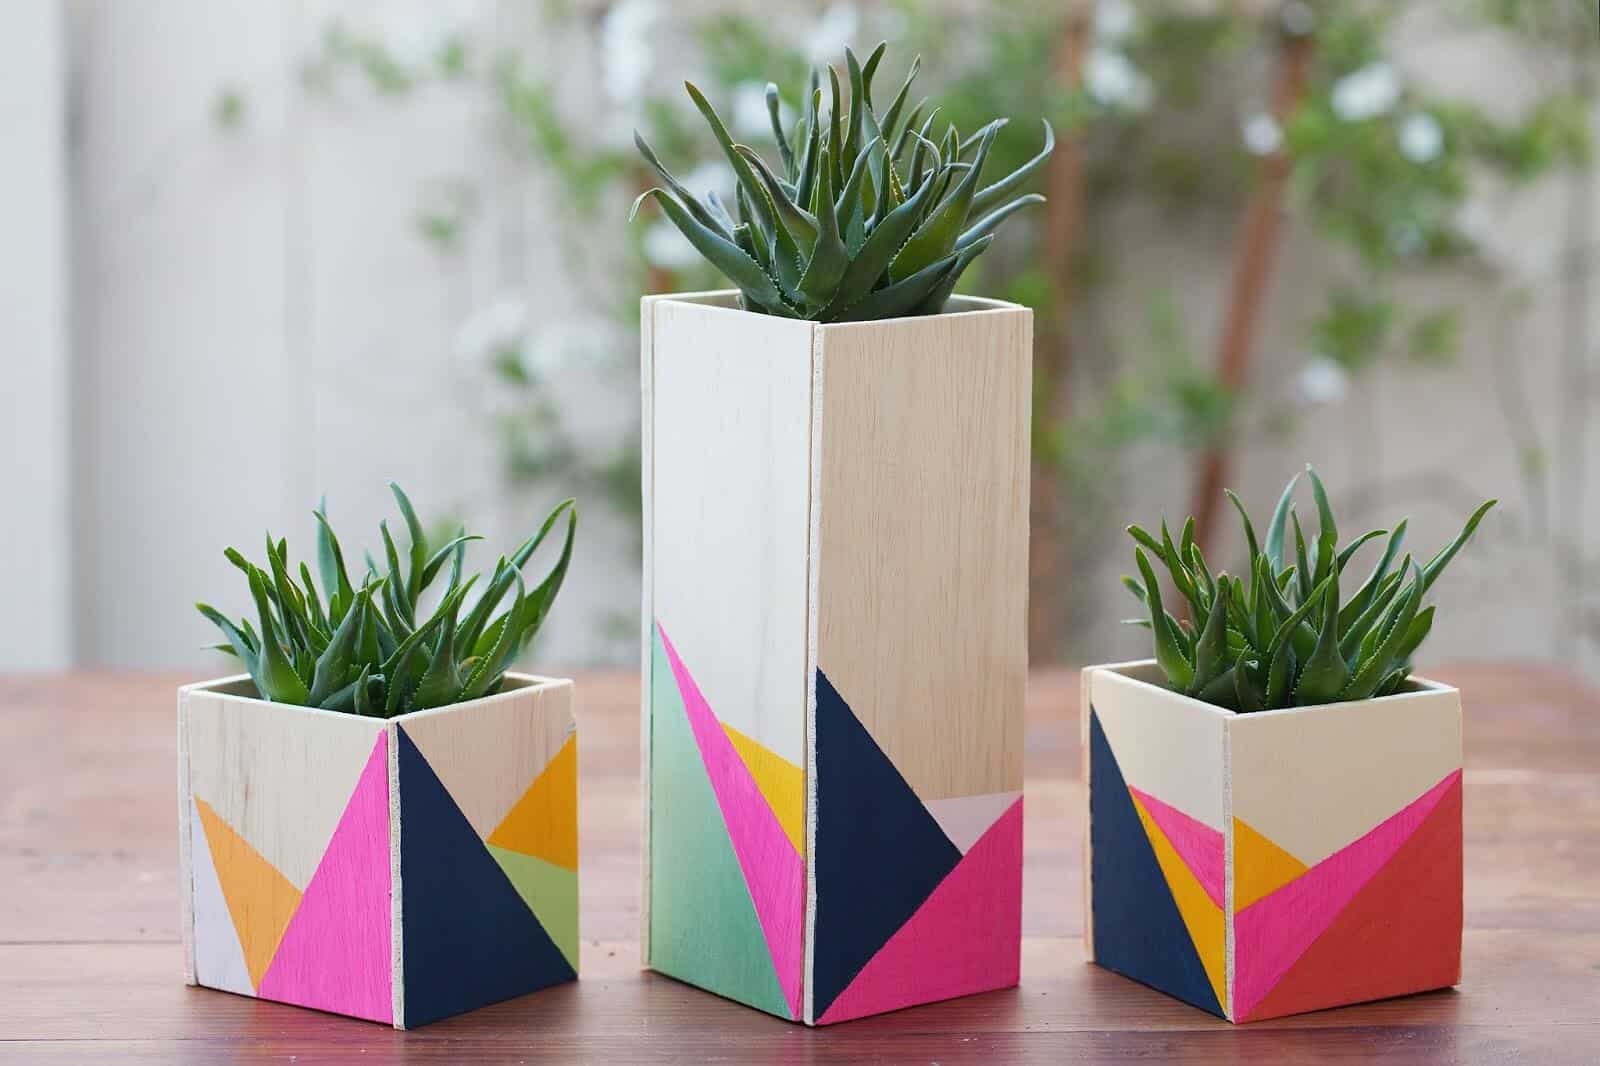 DIY Projects Made From Wood